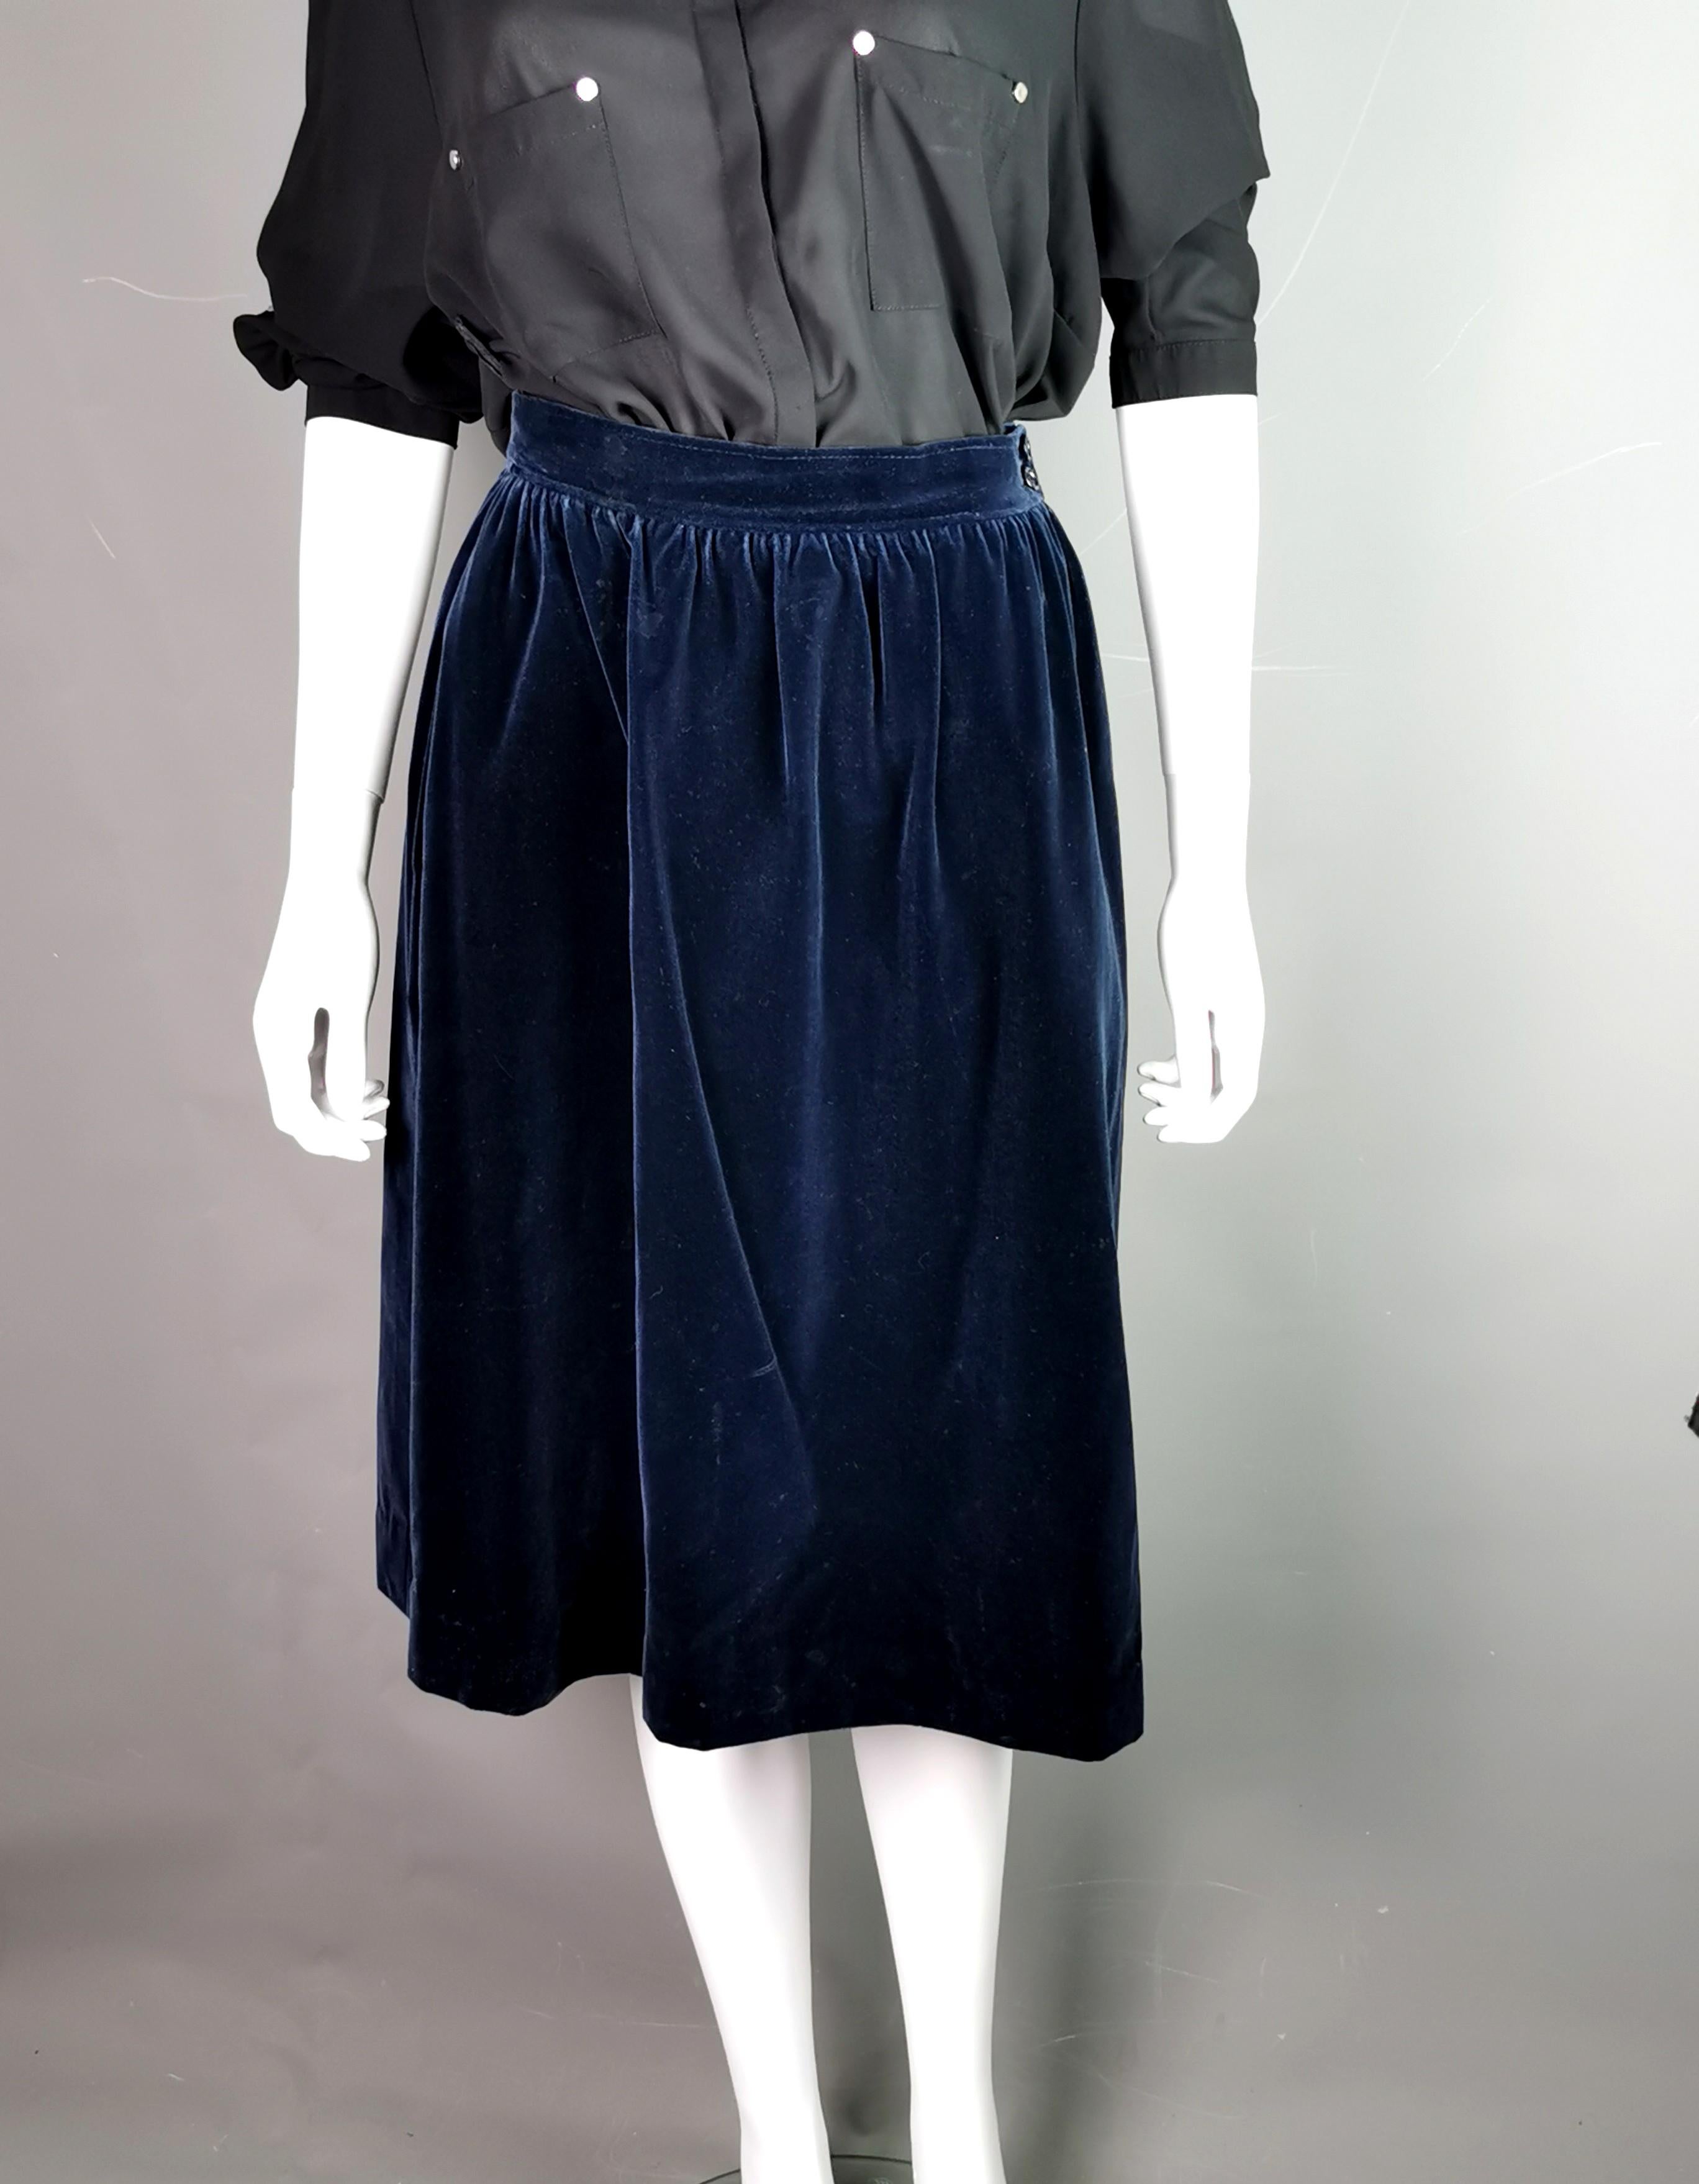 A stylish vintage YSL Rive Gauche navy blue velvet skirt.

It is a full skirt with a fitted waistband, a dark navy blue medium weight skirt that could make a great day to night transition.

It fastens at the side with two plastic buttons and a zip